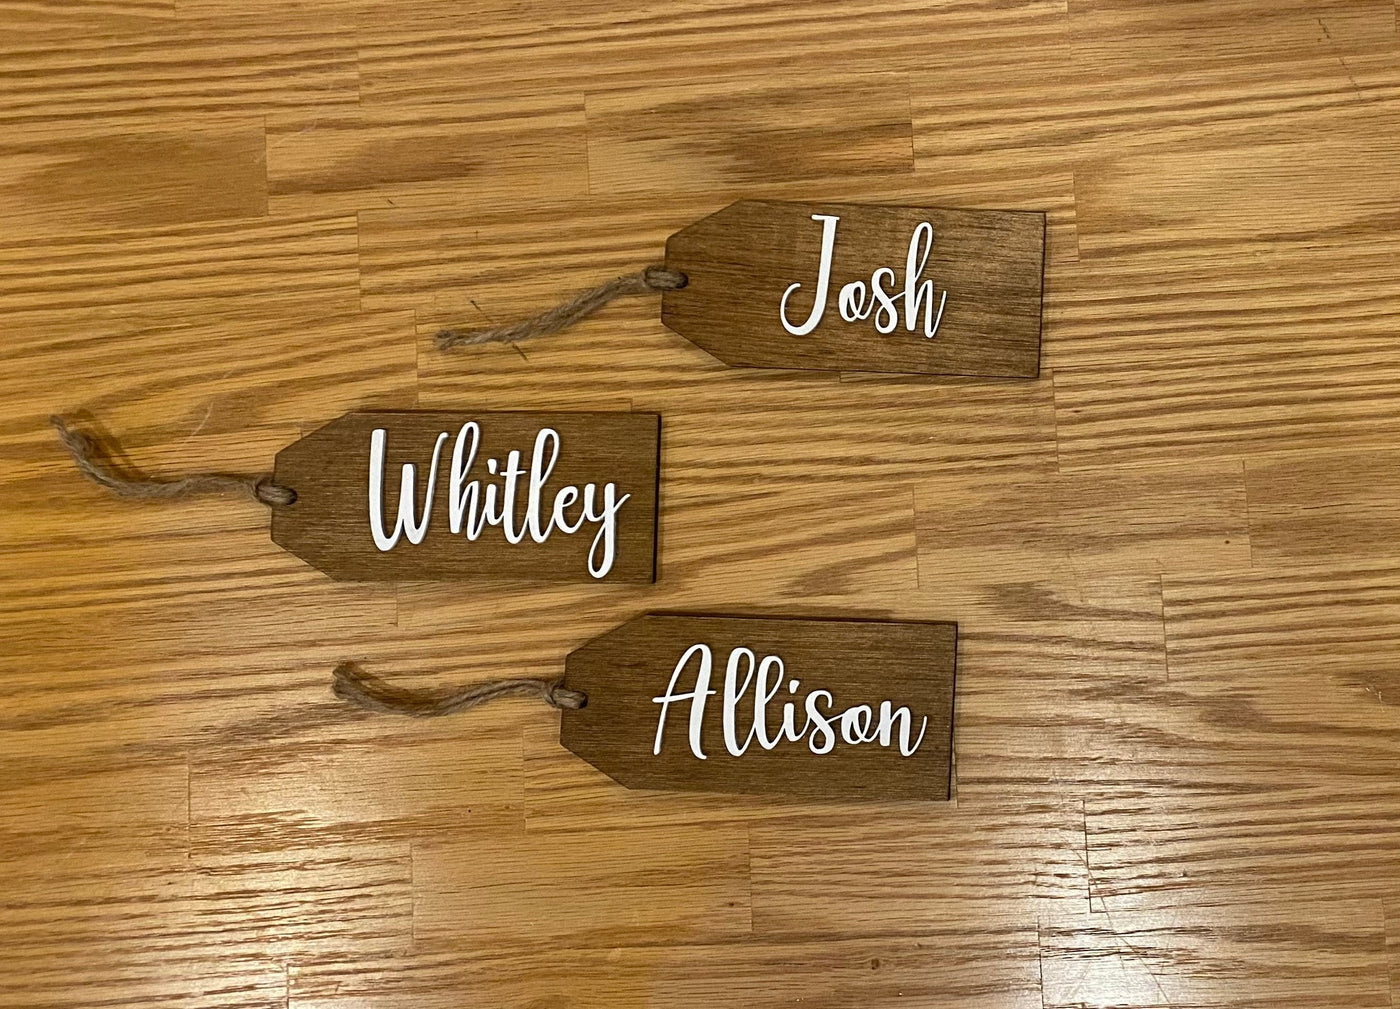 Personalized Stocking Name Tag – Hickory Hollow Designs